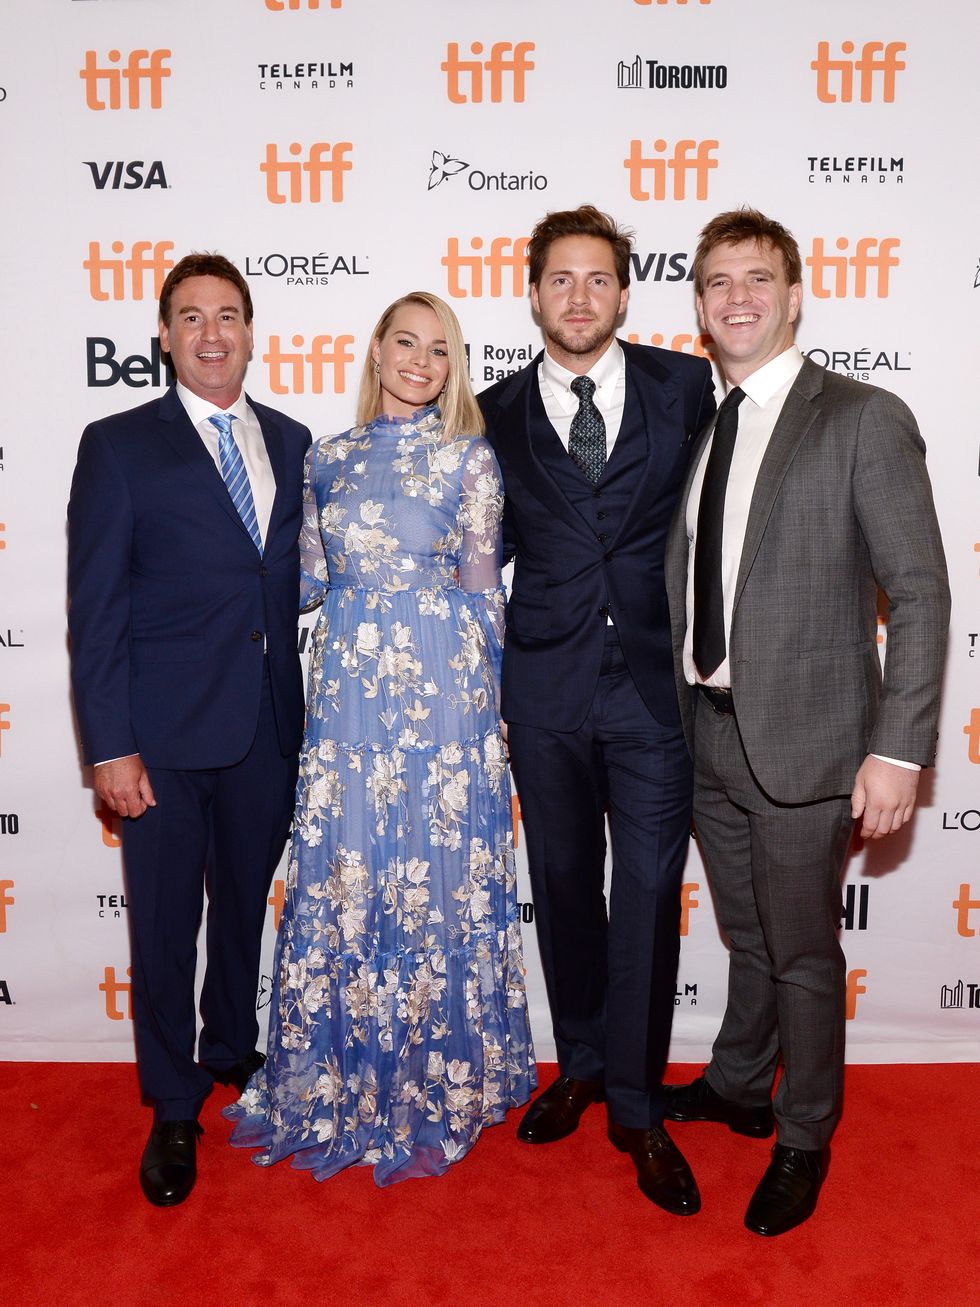 toronto, on september 08 l r steven rogers, margot robbie, tom ackerley and bryan unkeless attend the i, tonya premiere during the 2017 toronto international film festival at princess of wales theatre on september 8, 2017 in toronto, canada photo by gp imageswireimage